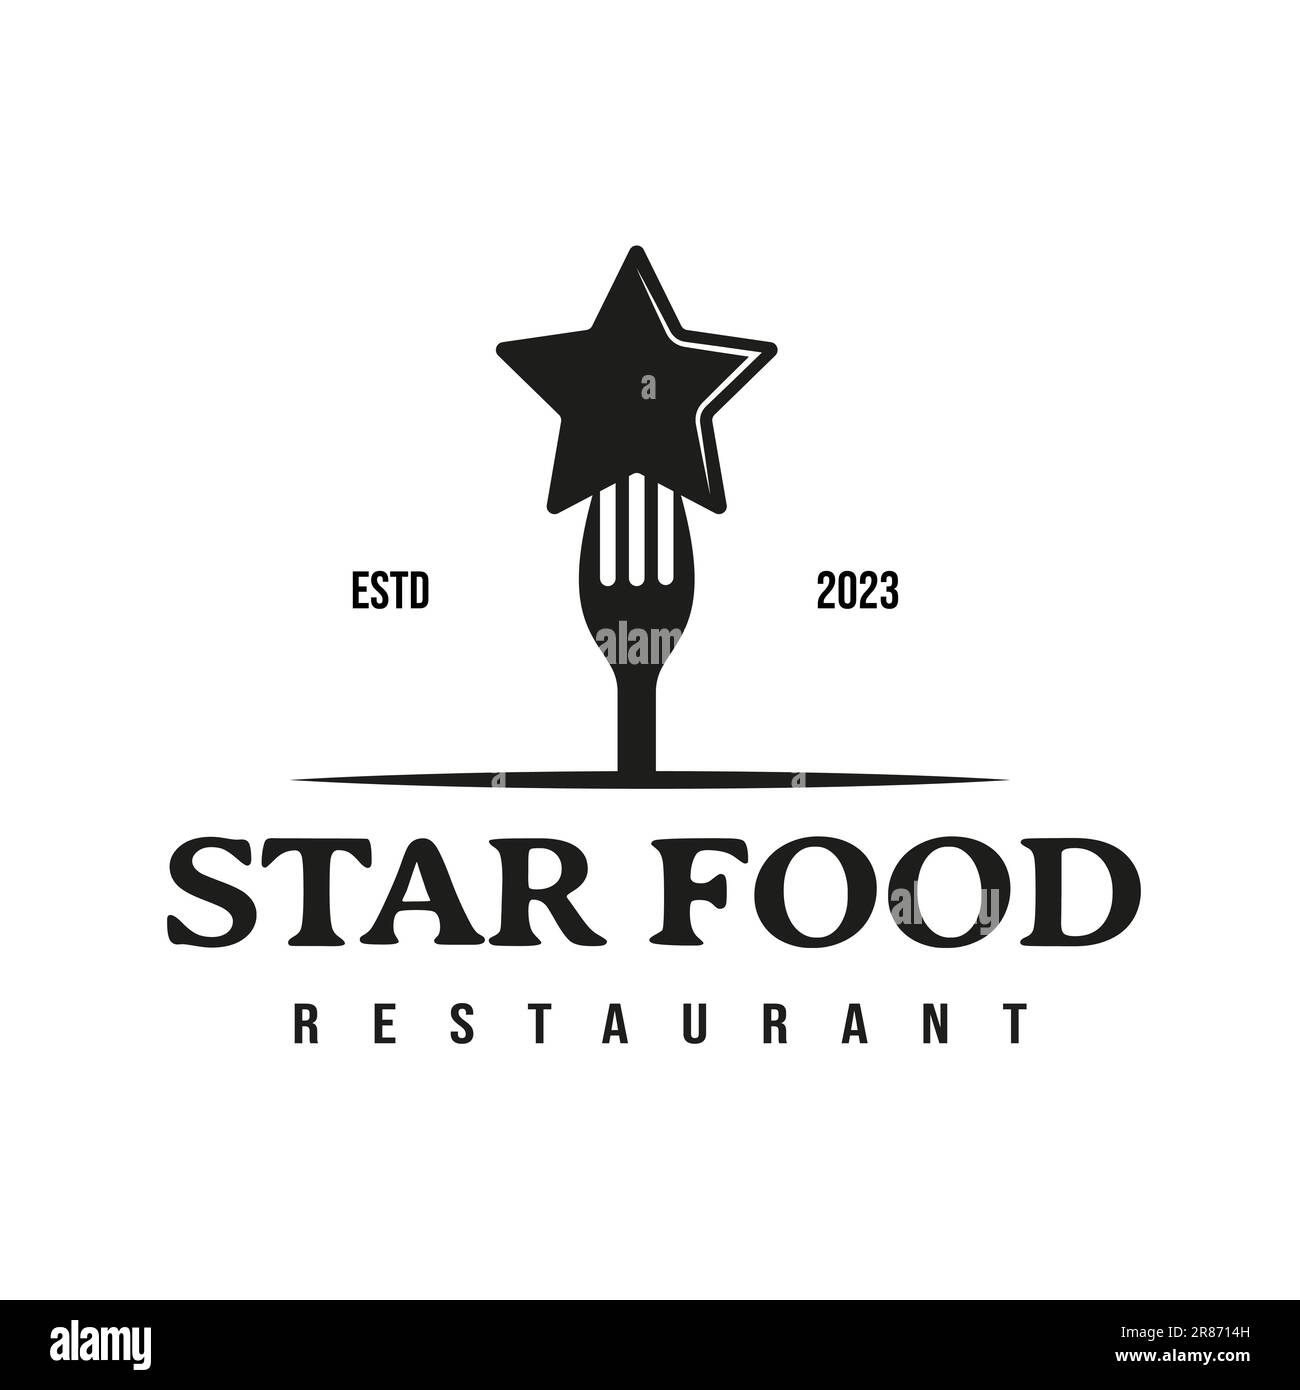 The vintage retro design inspiration of a fork and star icon can be used as a food logo for a restaurant Stock Vector